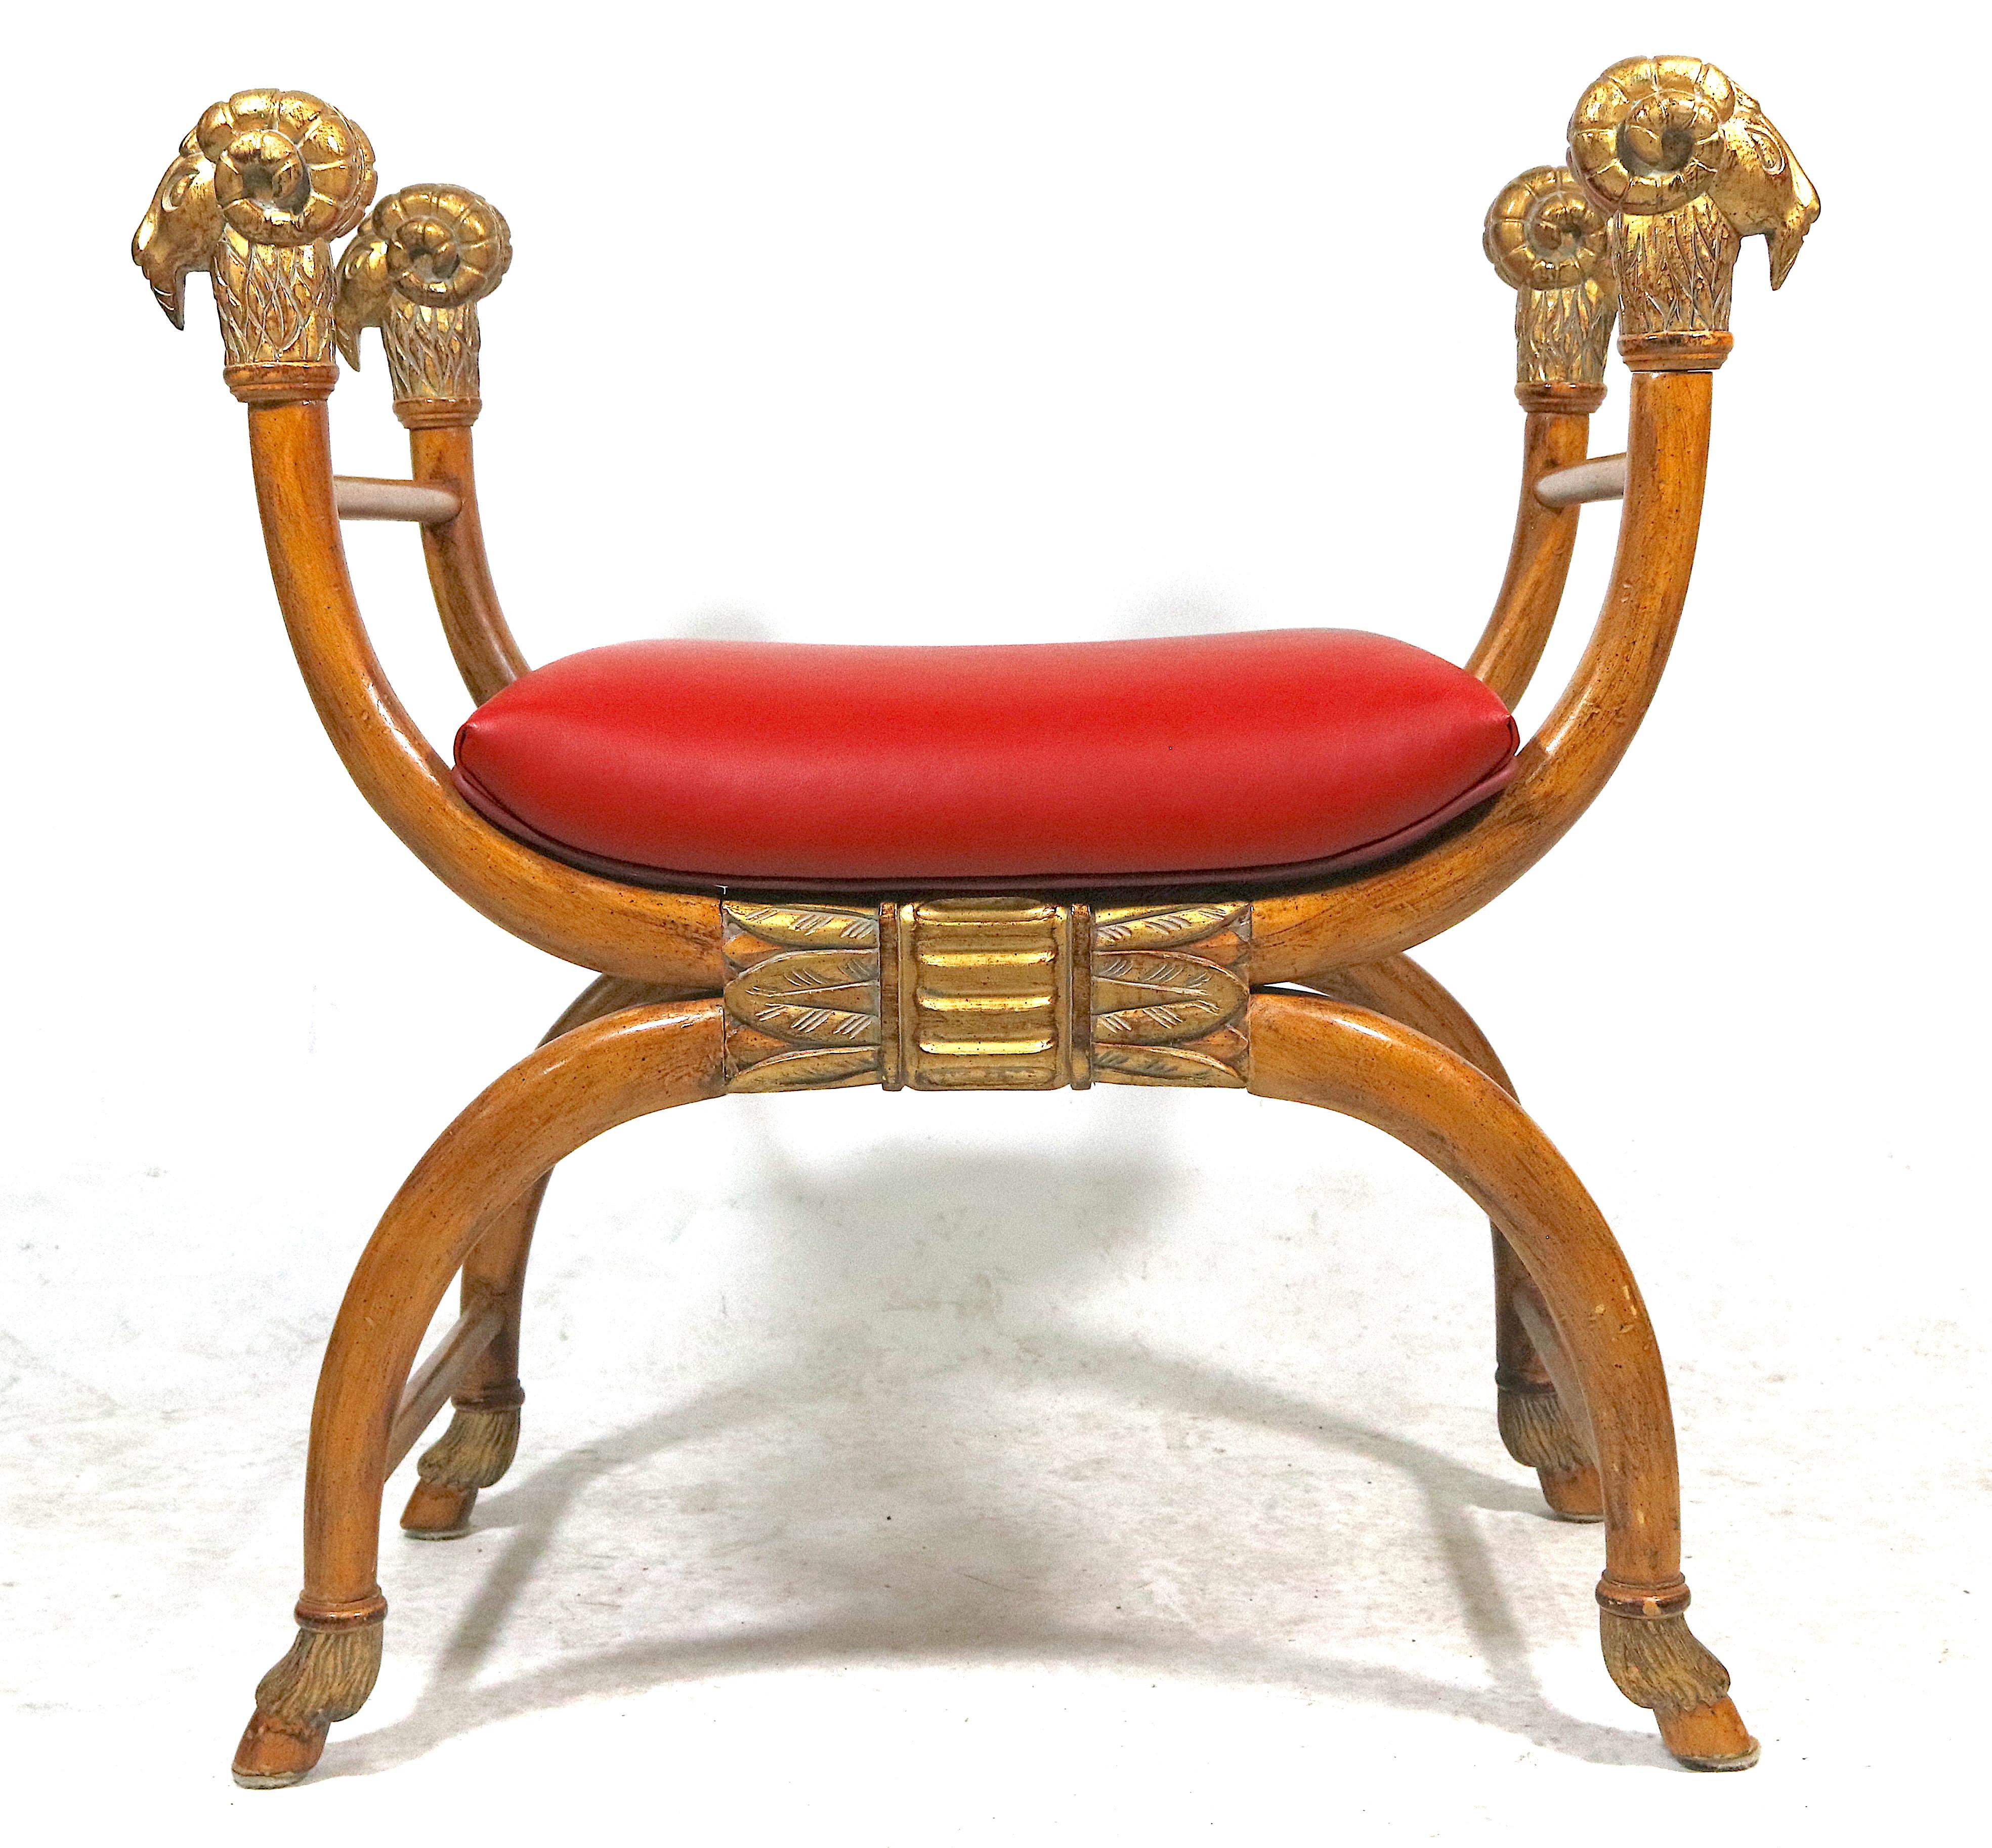 Haute style light wood bench with gilt carved curved arms ending in nicely detailed ram's head, Egyptian design carved centre apron, the curved legs terminate in 
Carved Hoof Feet.
Exotic Egyptian revival, grand scale bench. Mid-20th century
New